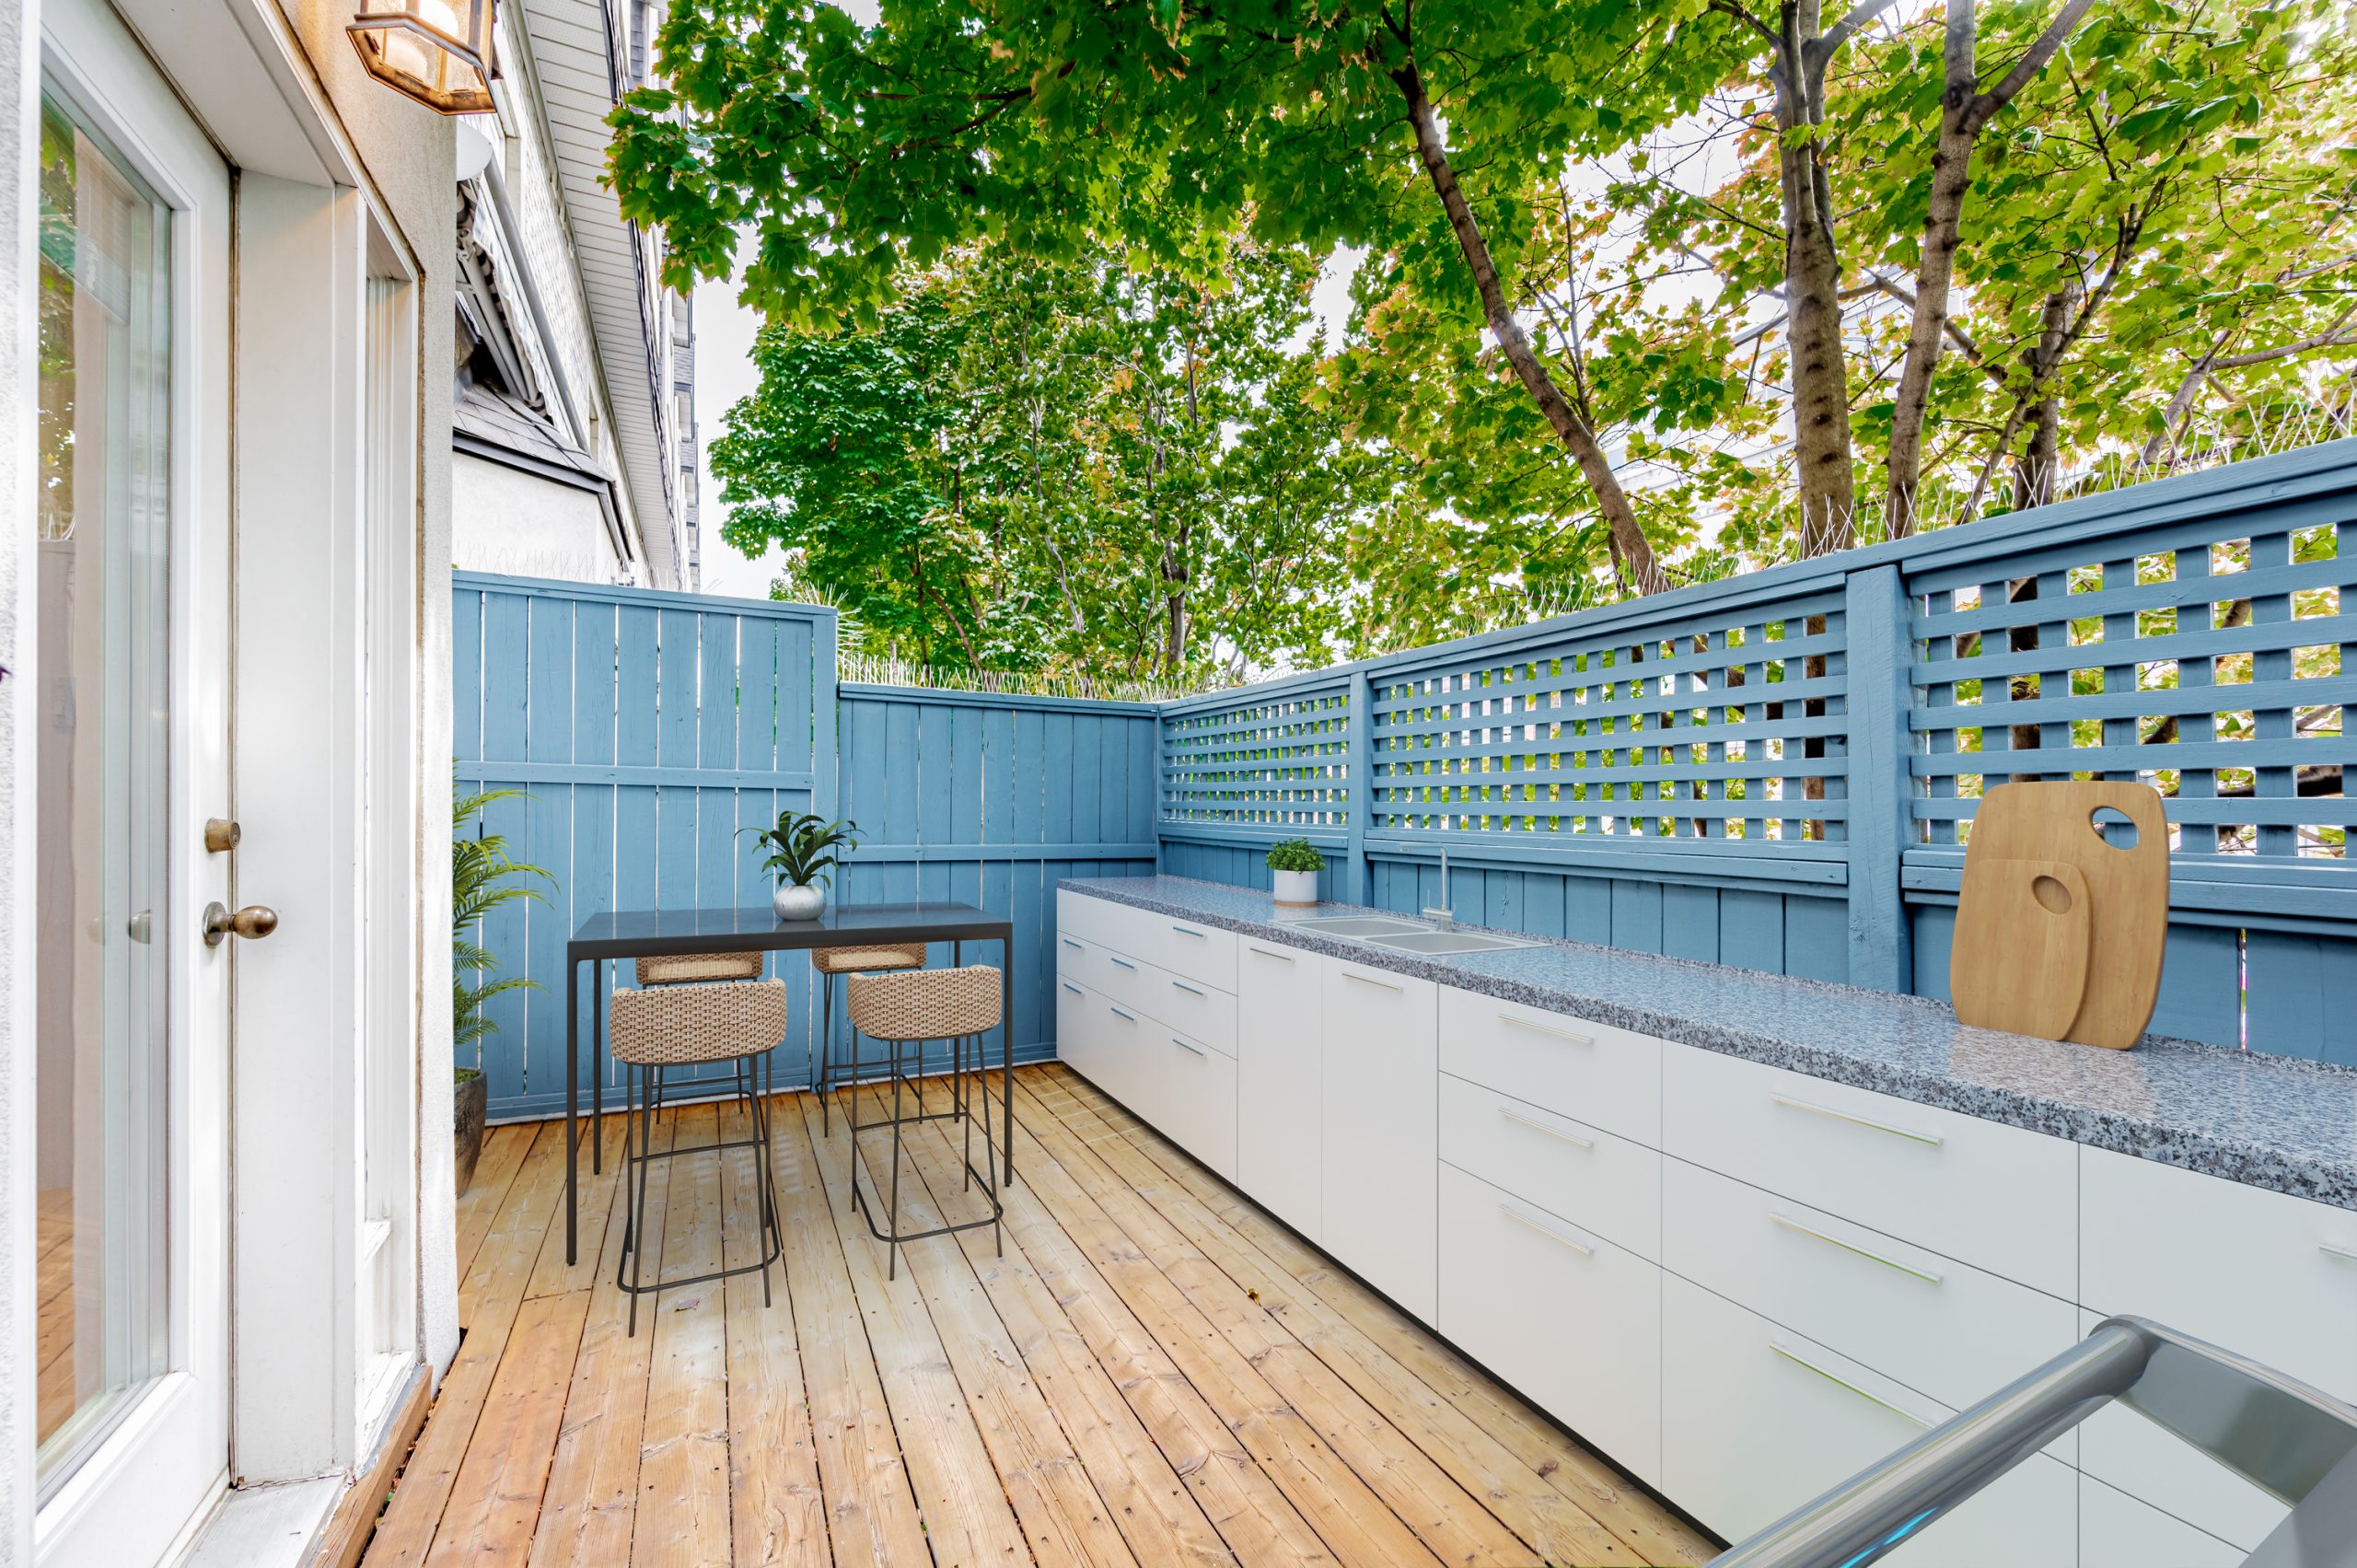 Deck with counters and blue fence.